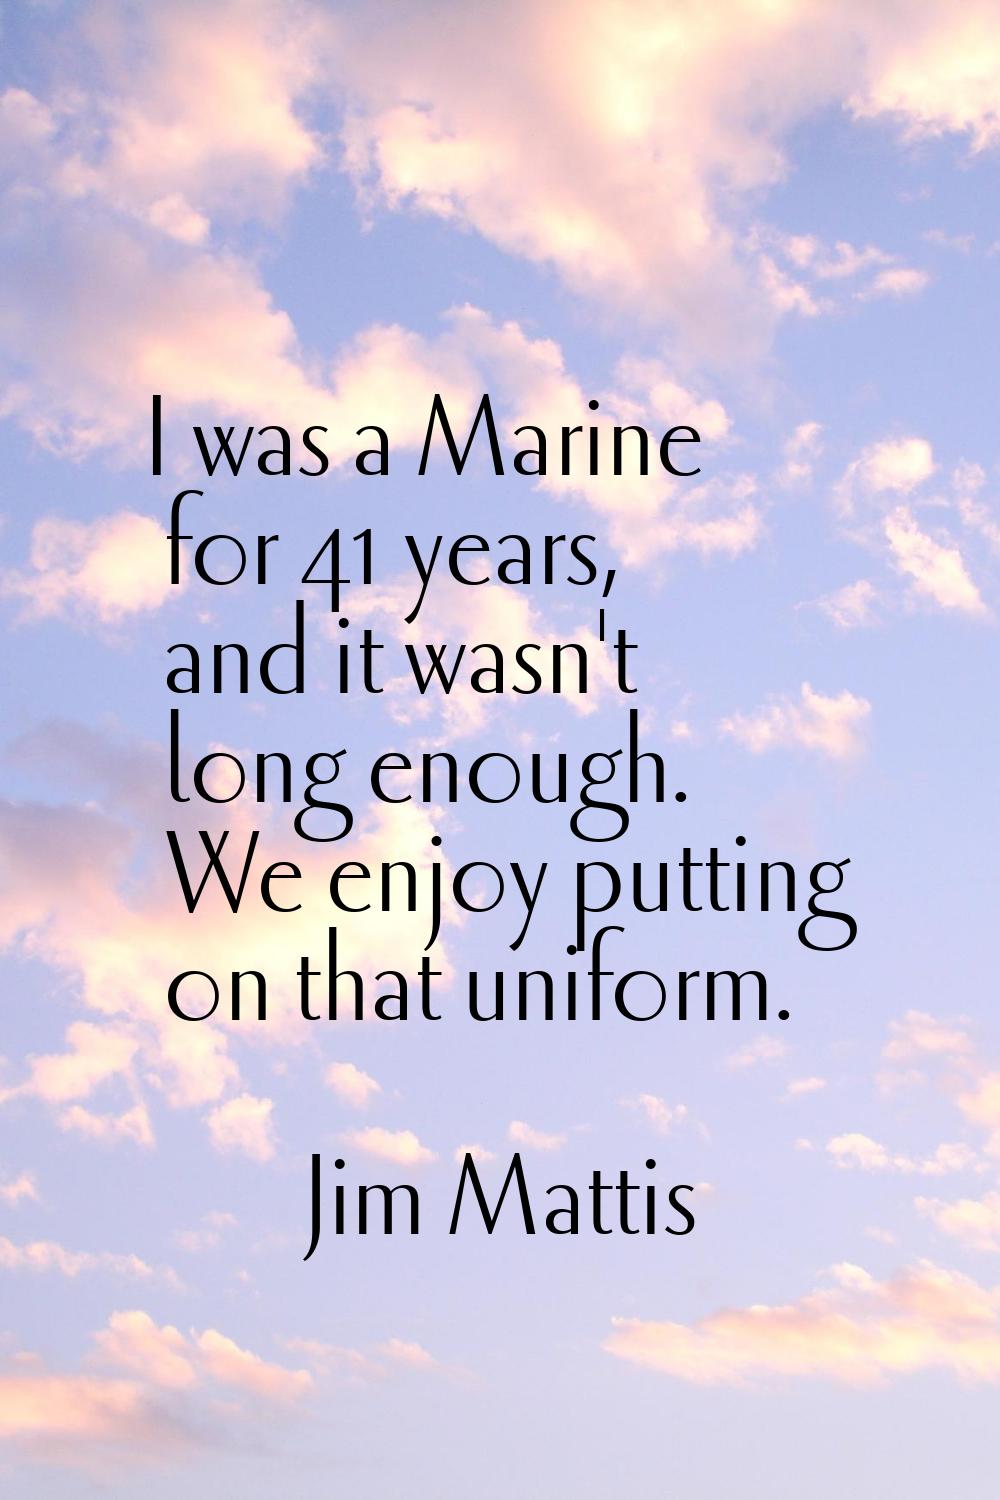 I was a Marine for 41 years, and it wasn't long enough. We enjoy putting on that uniform.